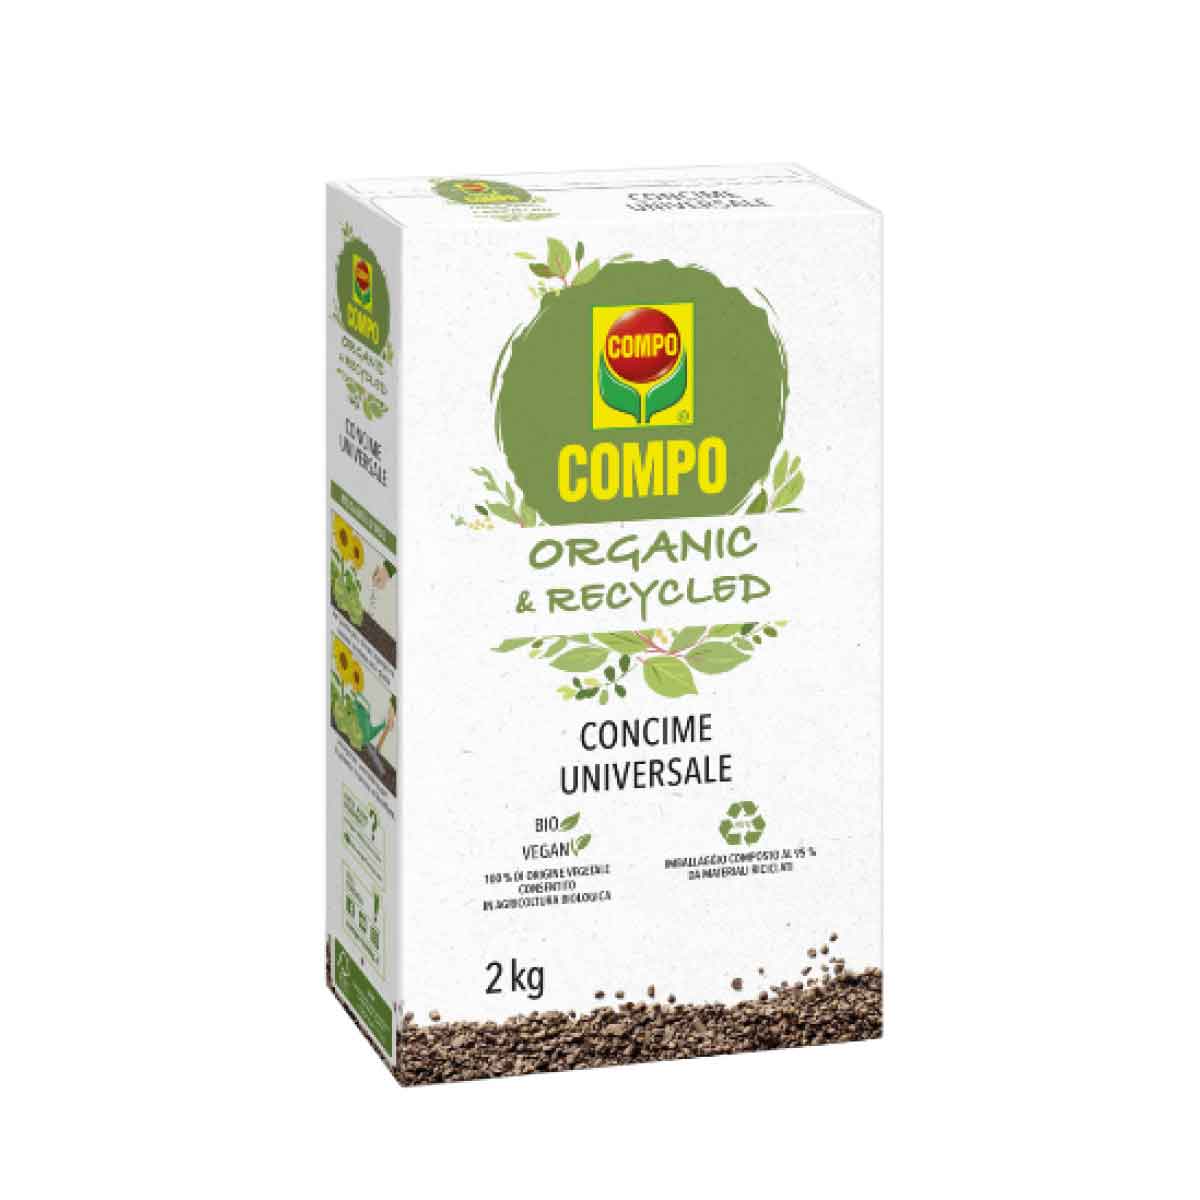 Compo Organic & Recycled Concime Granulare Universale